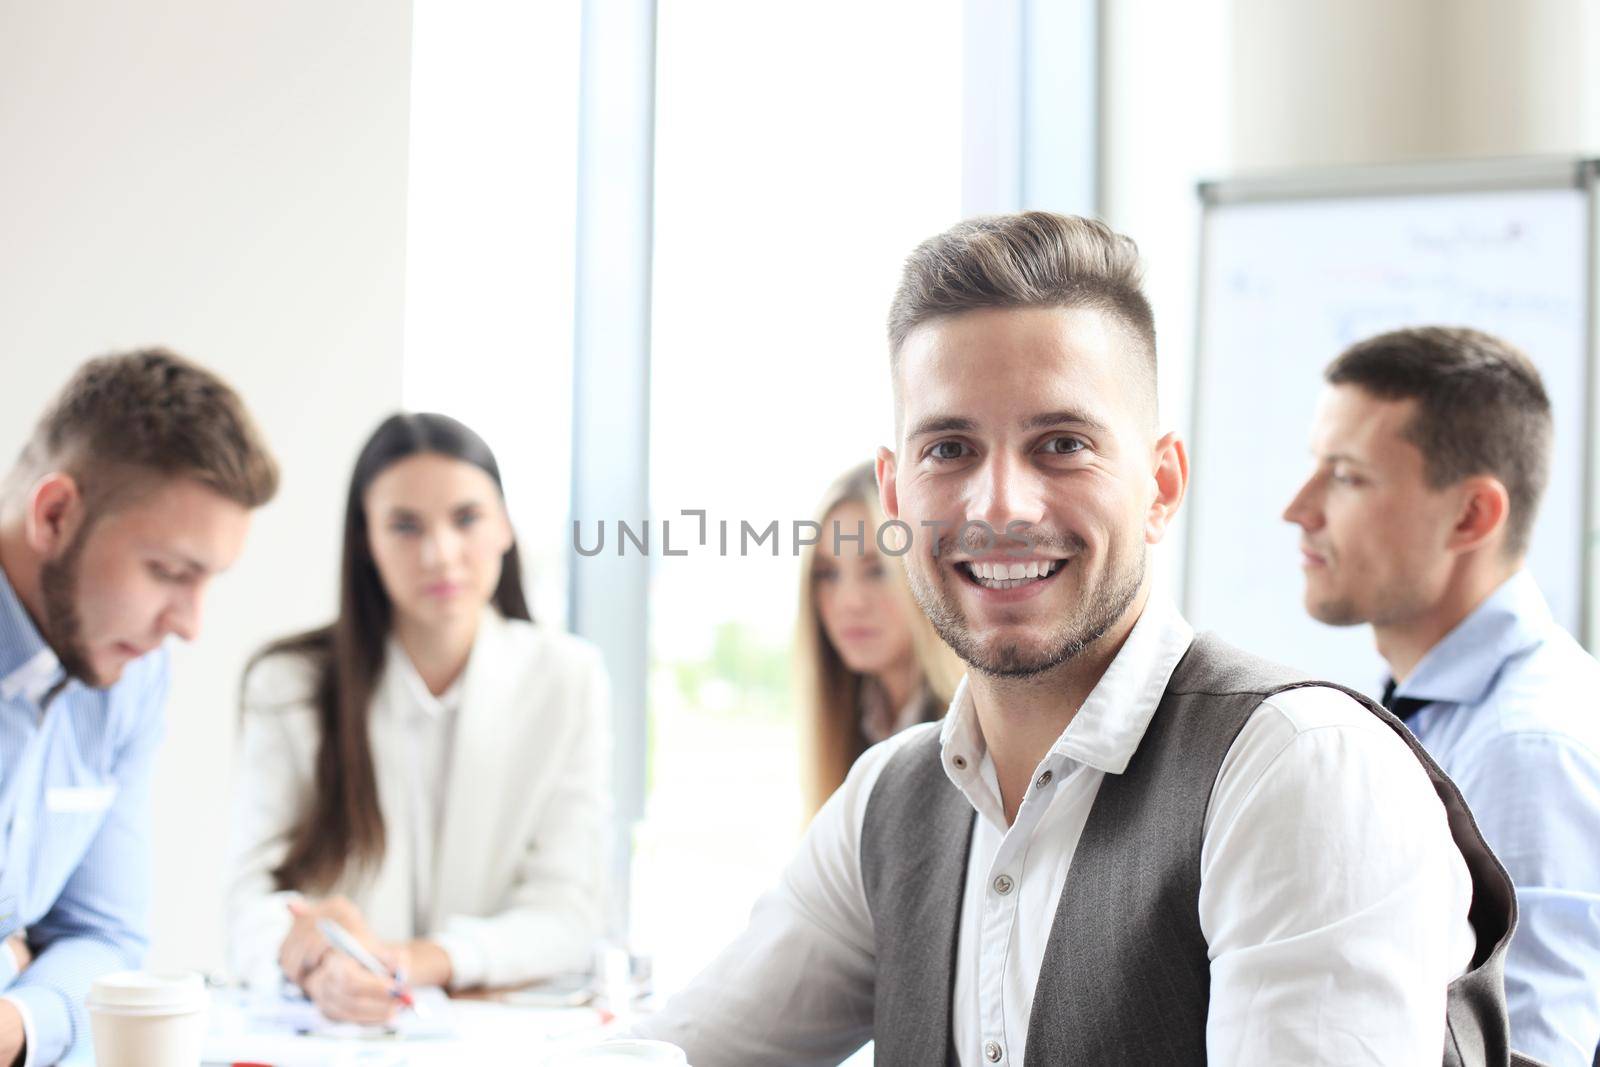 Businessman with colleagues in the background in office.